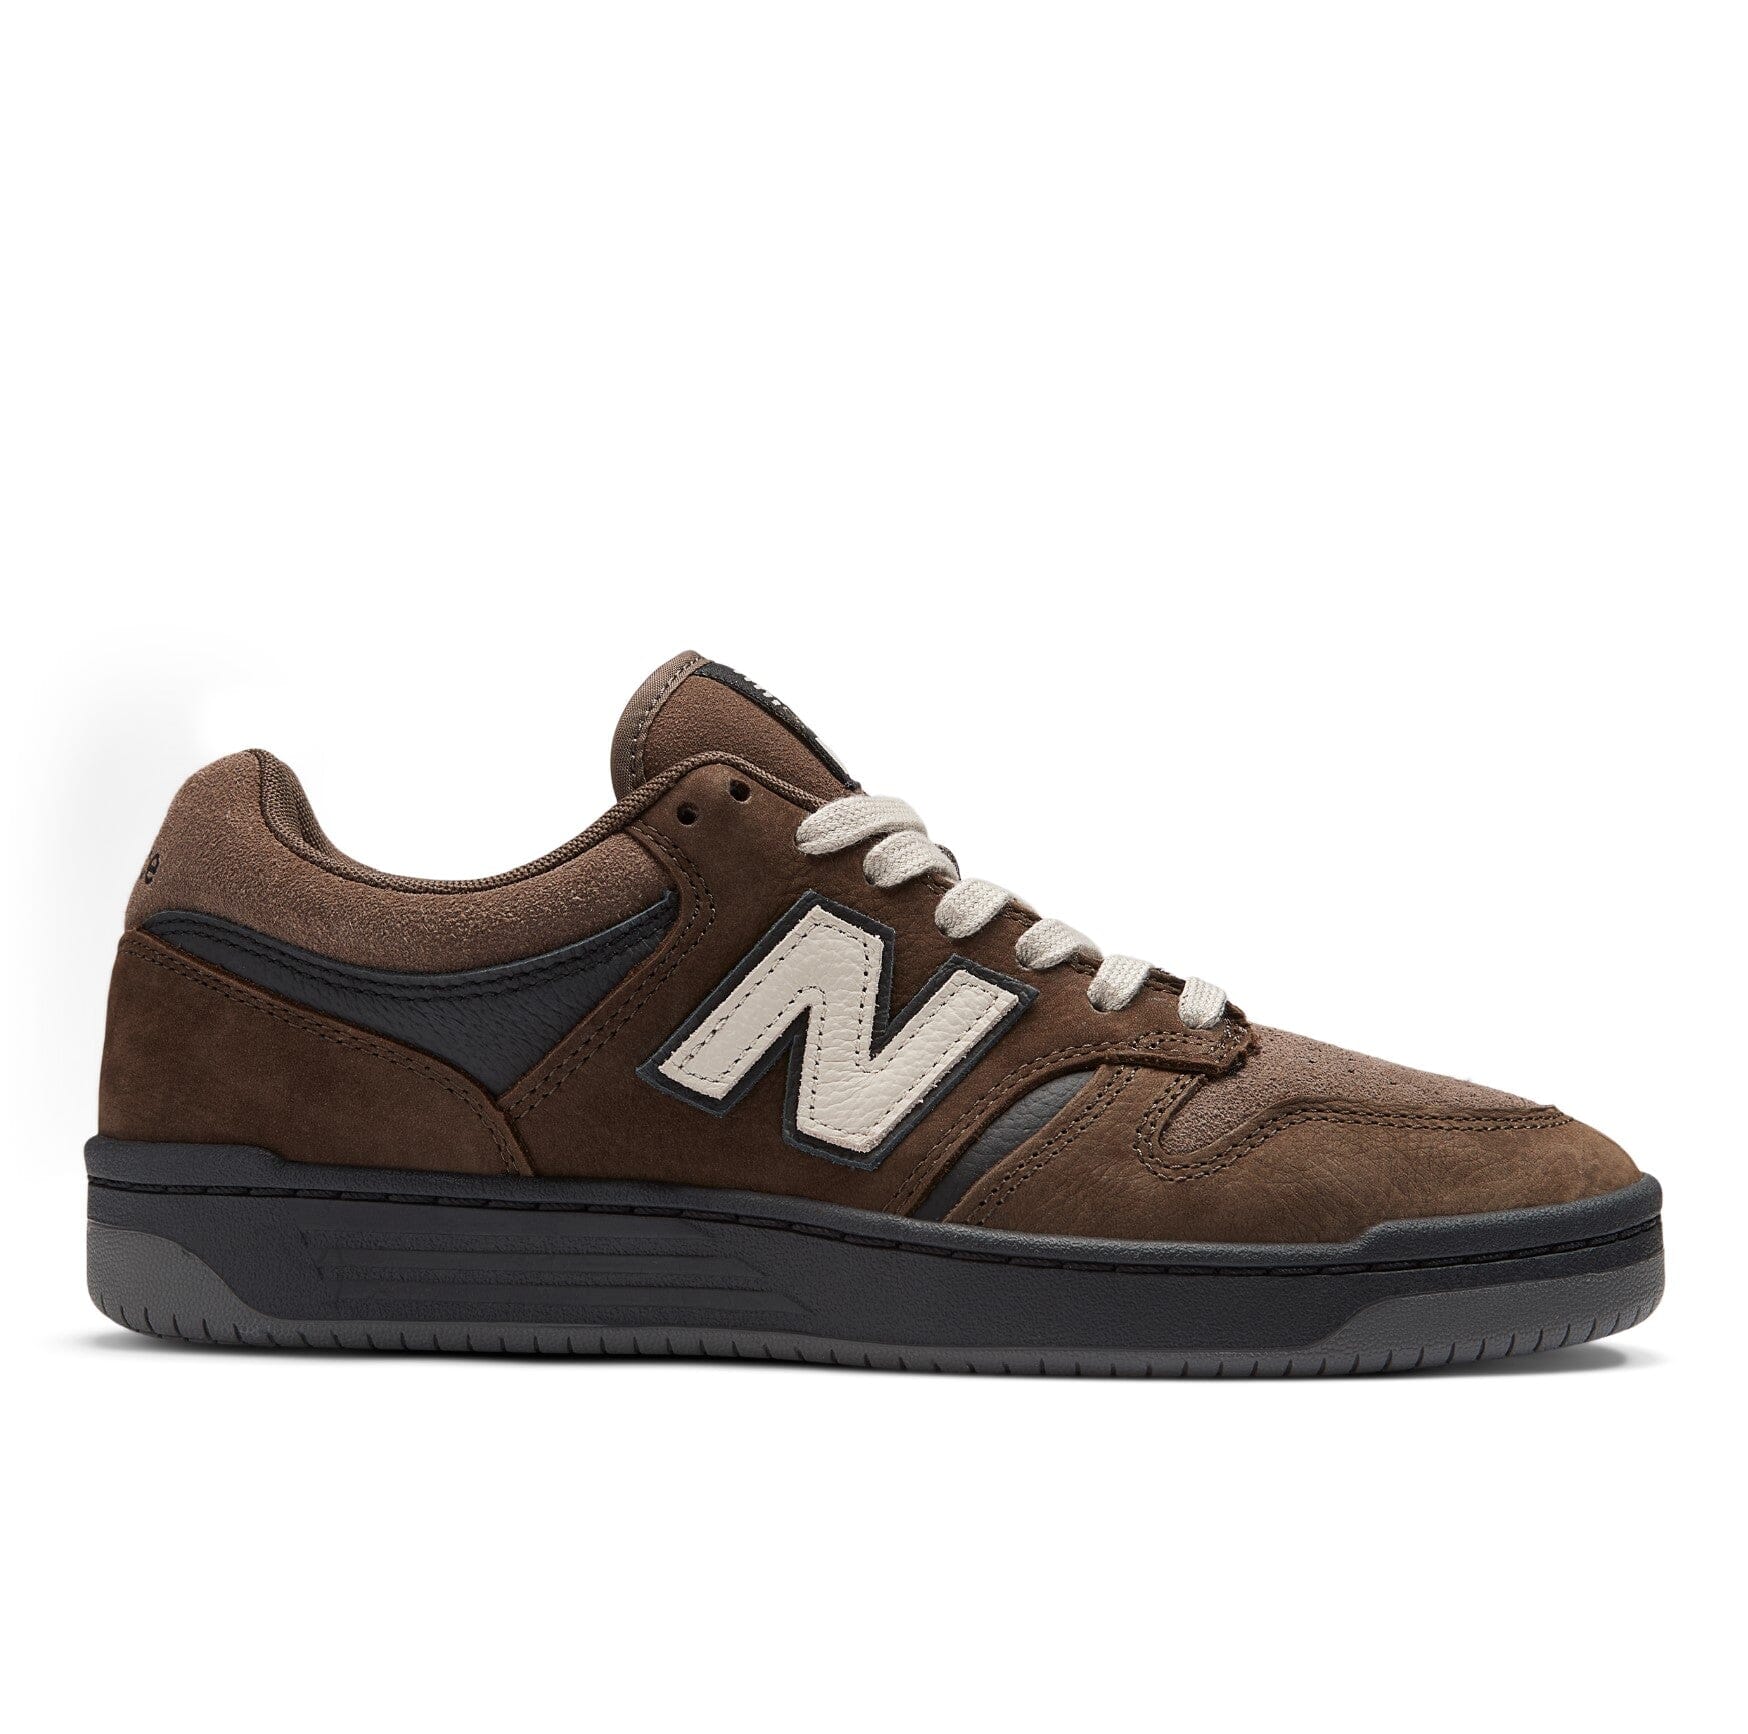 NB NUMERIC 480 Andrew Reynolds Shoes Chocolate/Black Men's Skate Shoes New Balance 